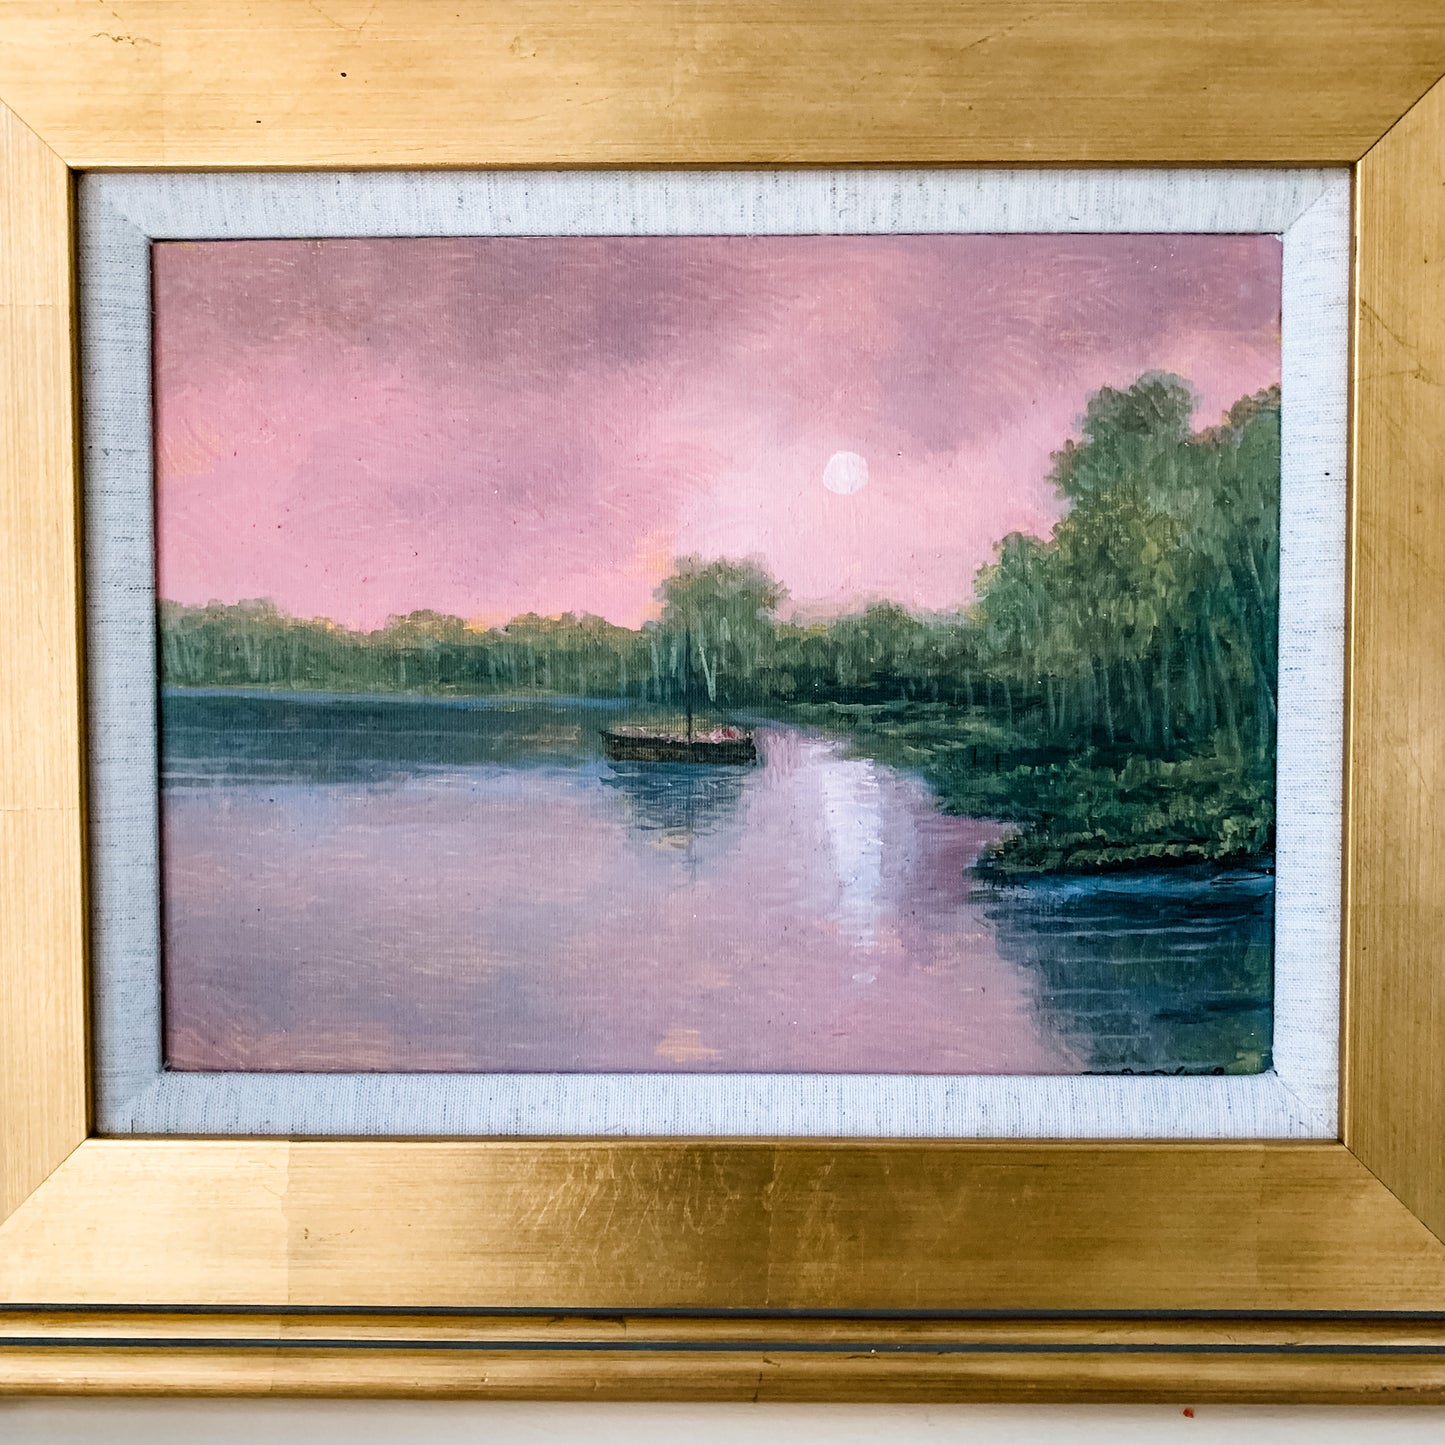 "Sunset Reflection" - Original signed oil on canvas painting